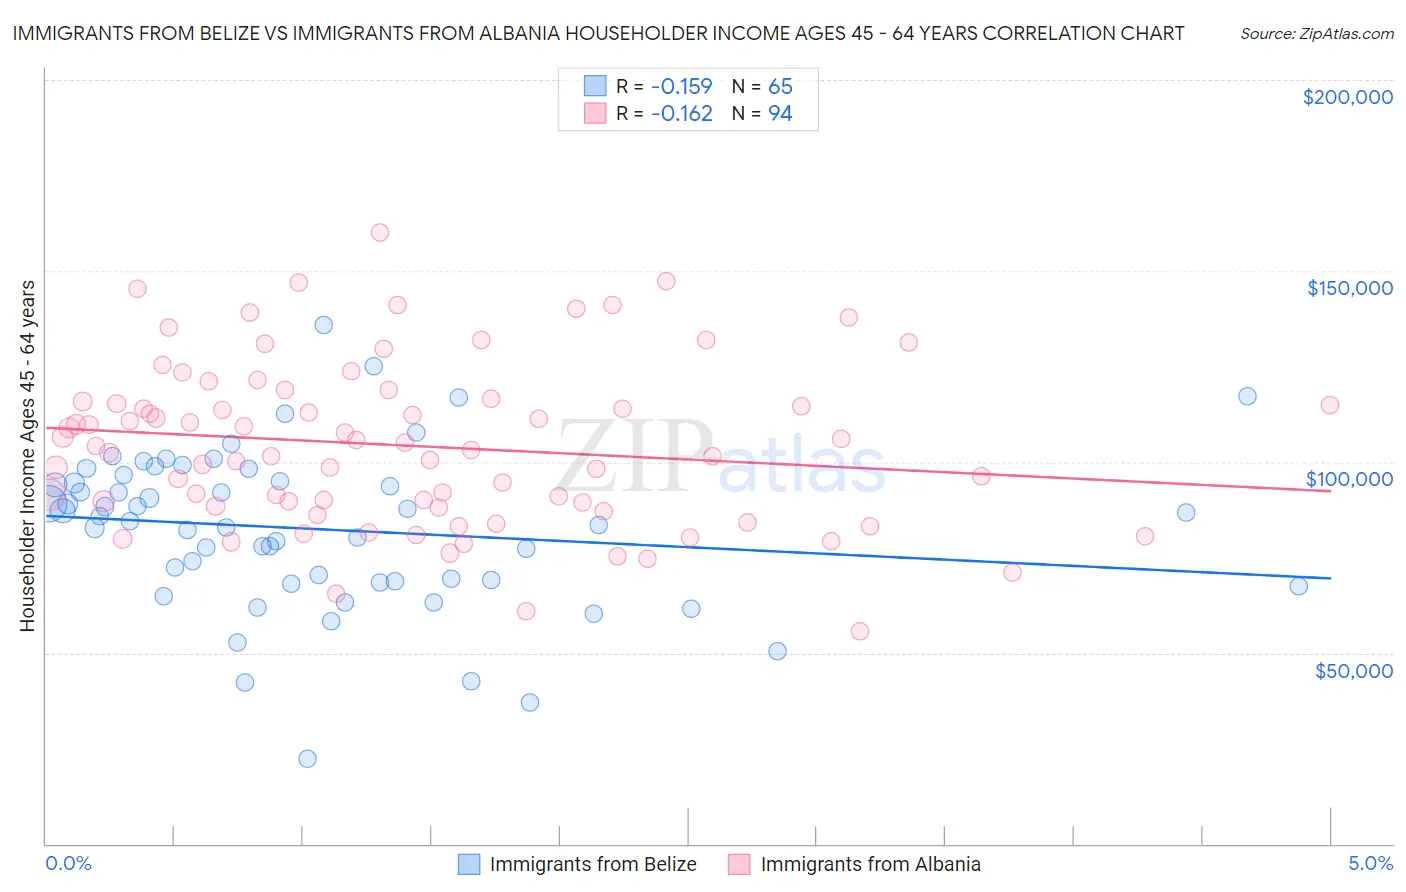 Immigrants from Belize vs Immigrants from Albania Householder Income Ages 45 - 64 years